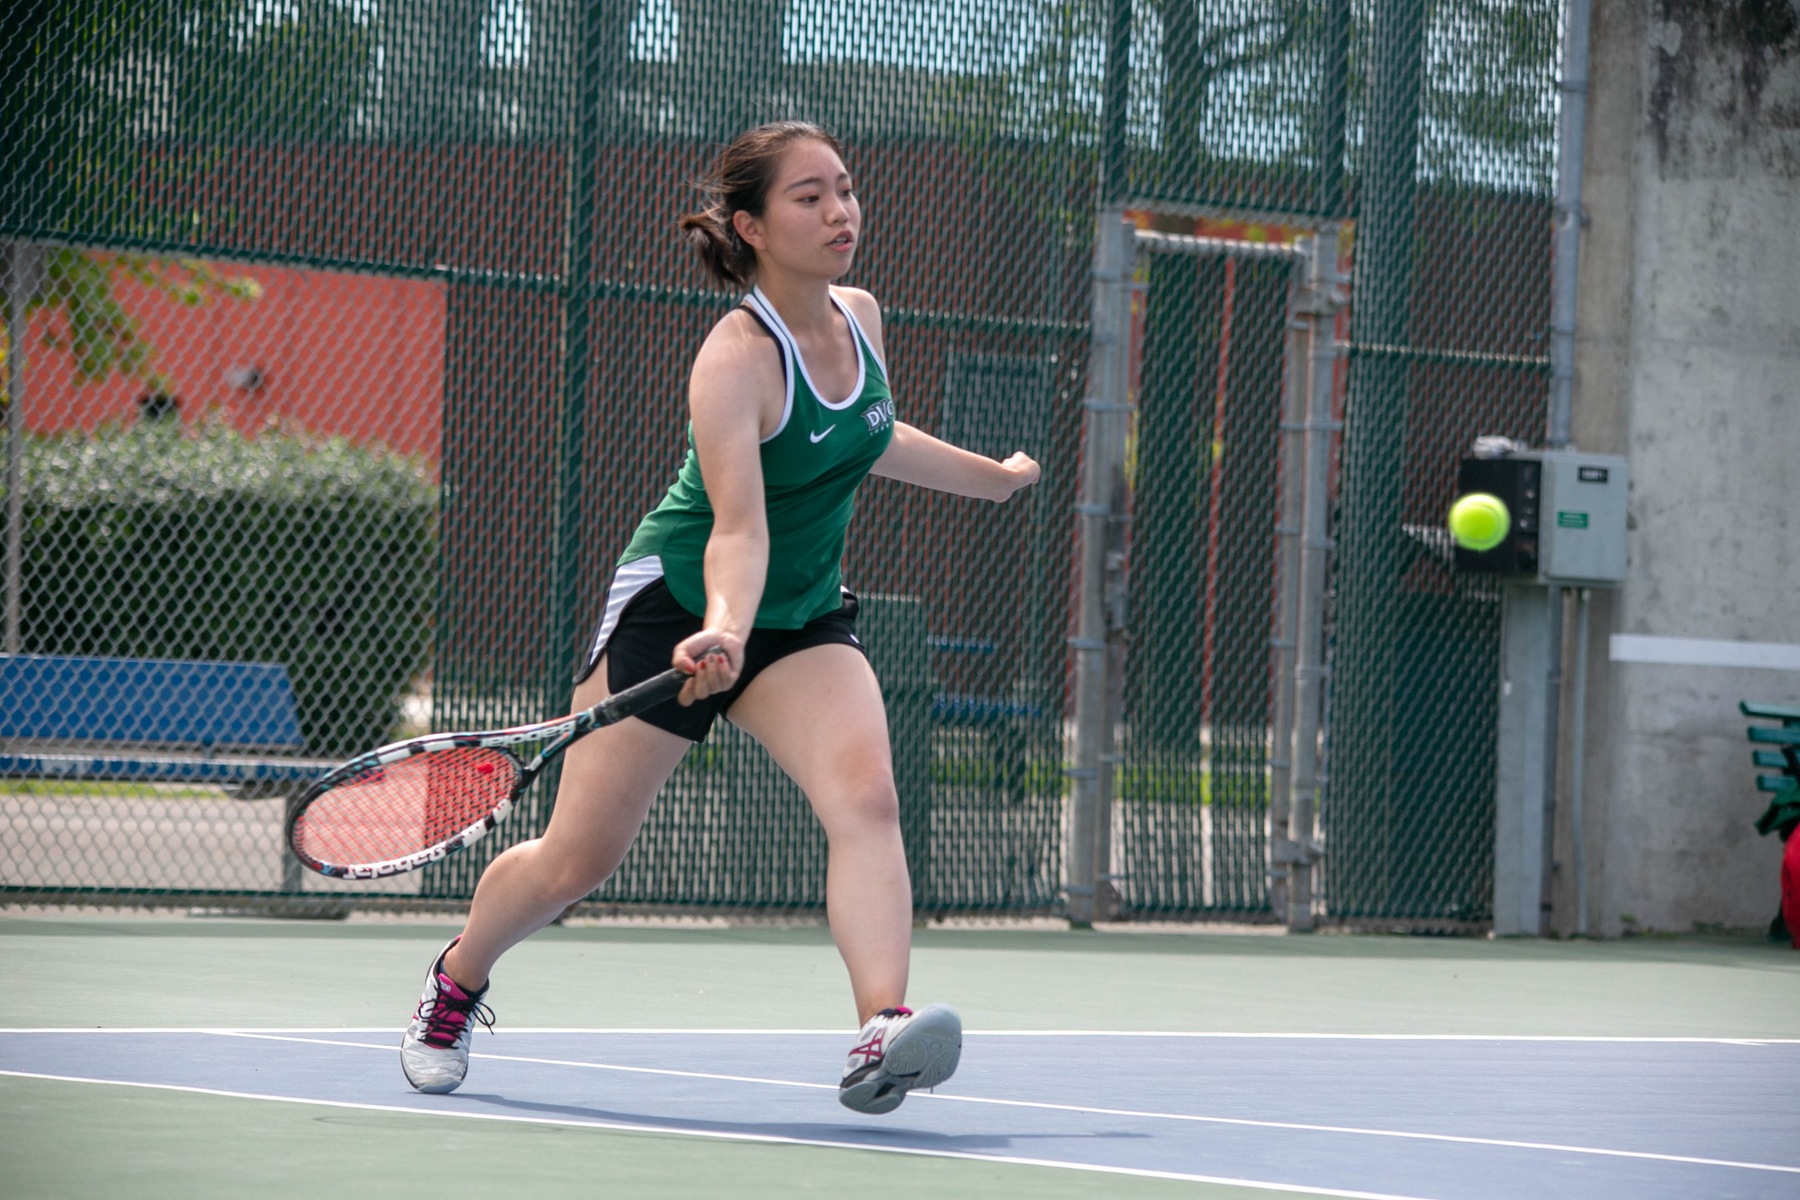 Women's Tennis looking to rebound at the Modesto Tournament this weekend after loss to West Valley